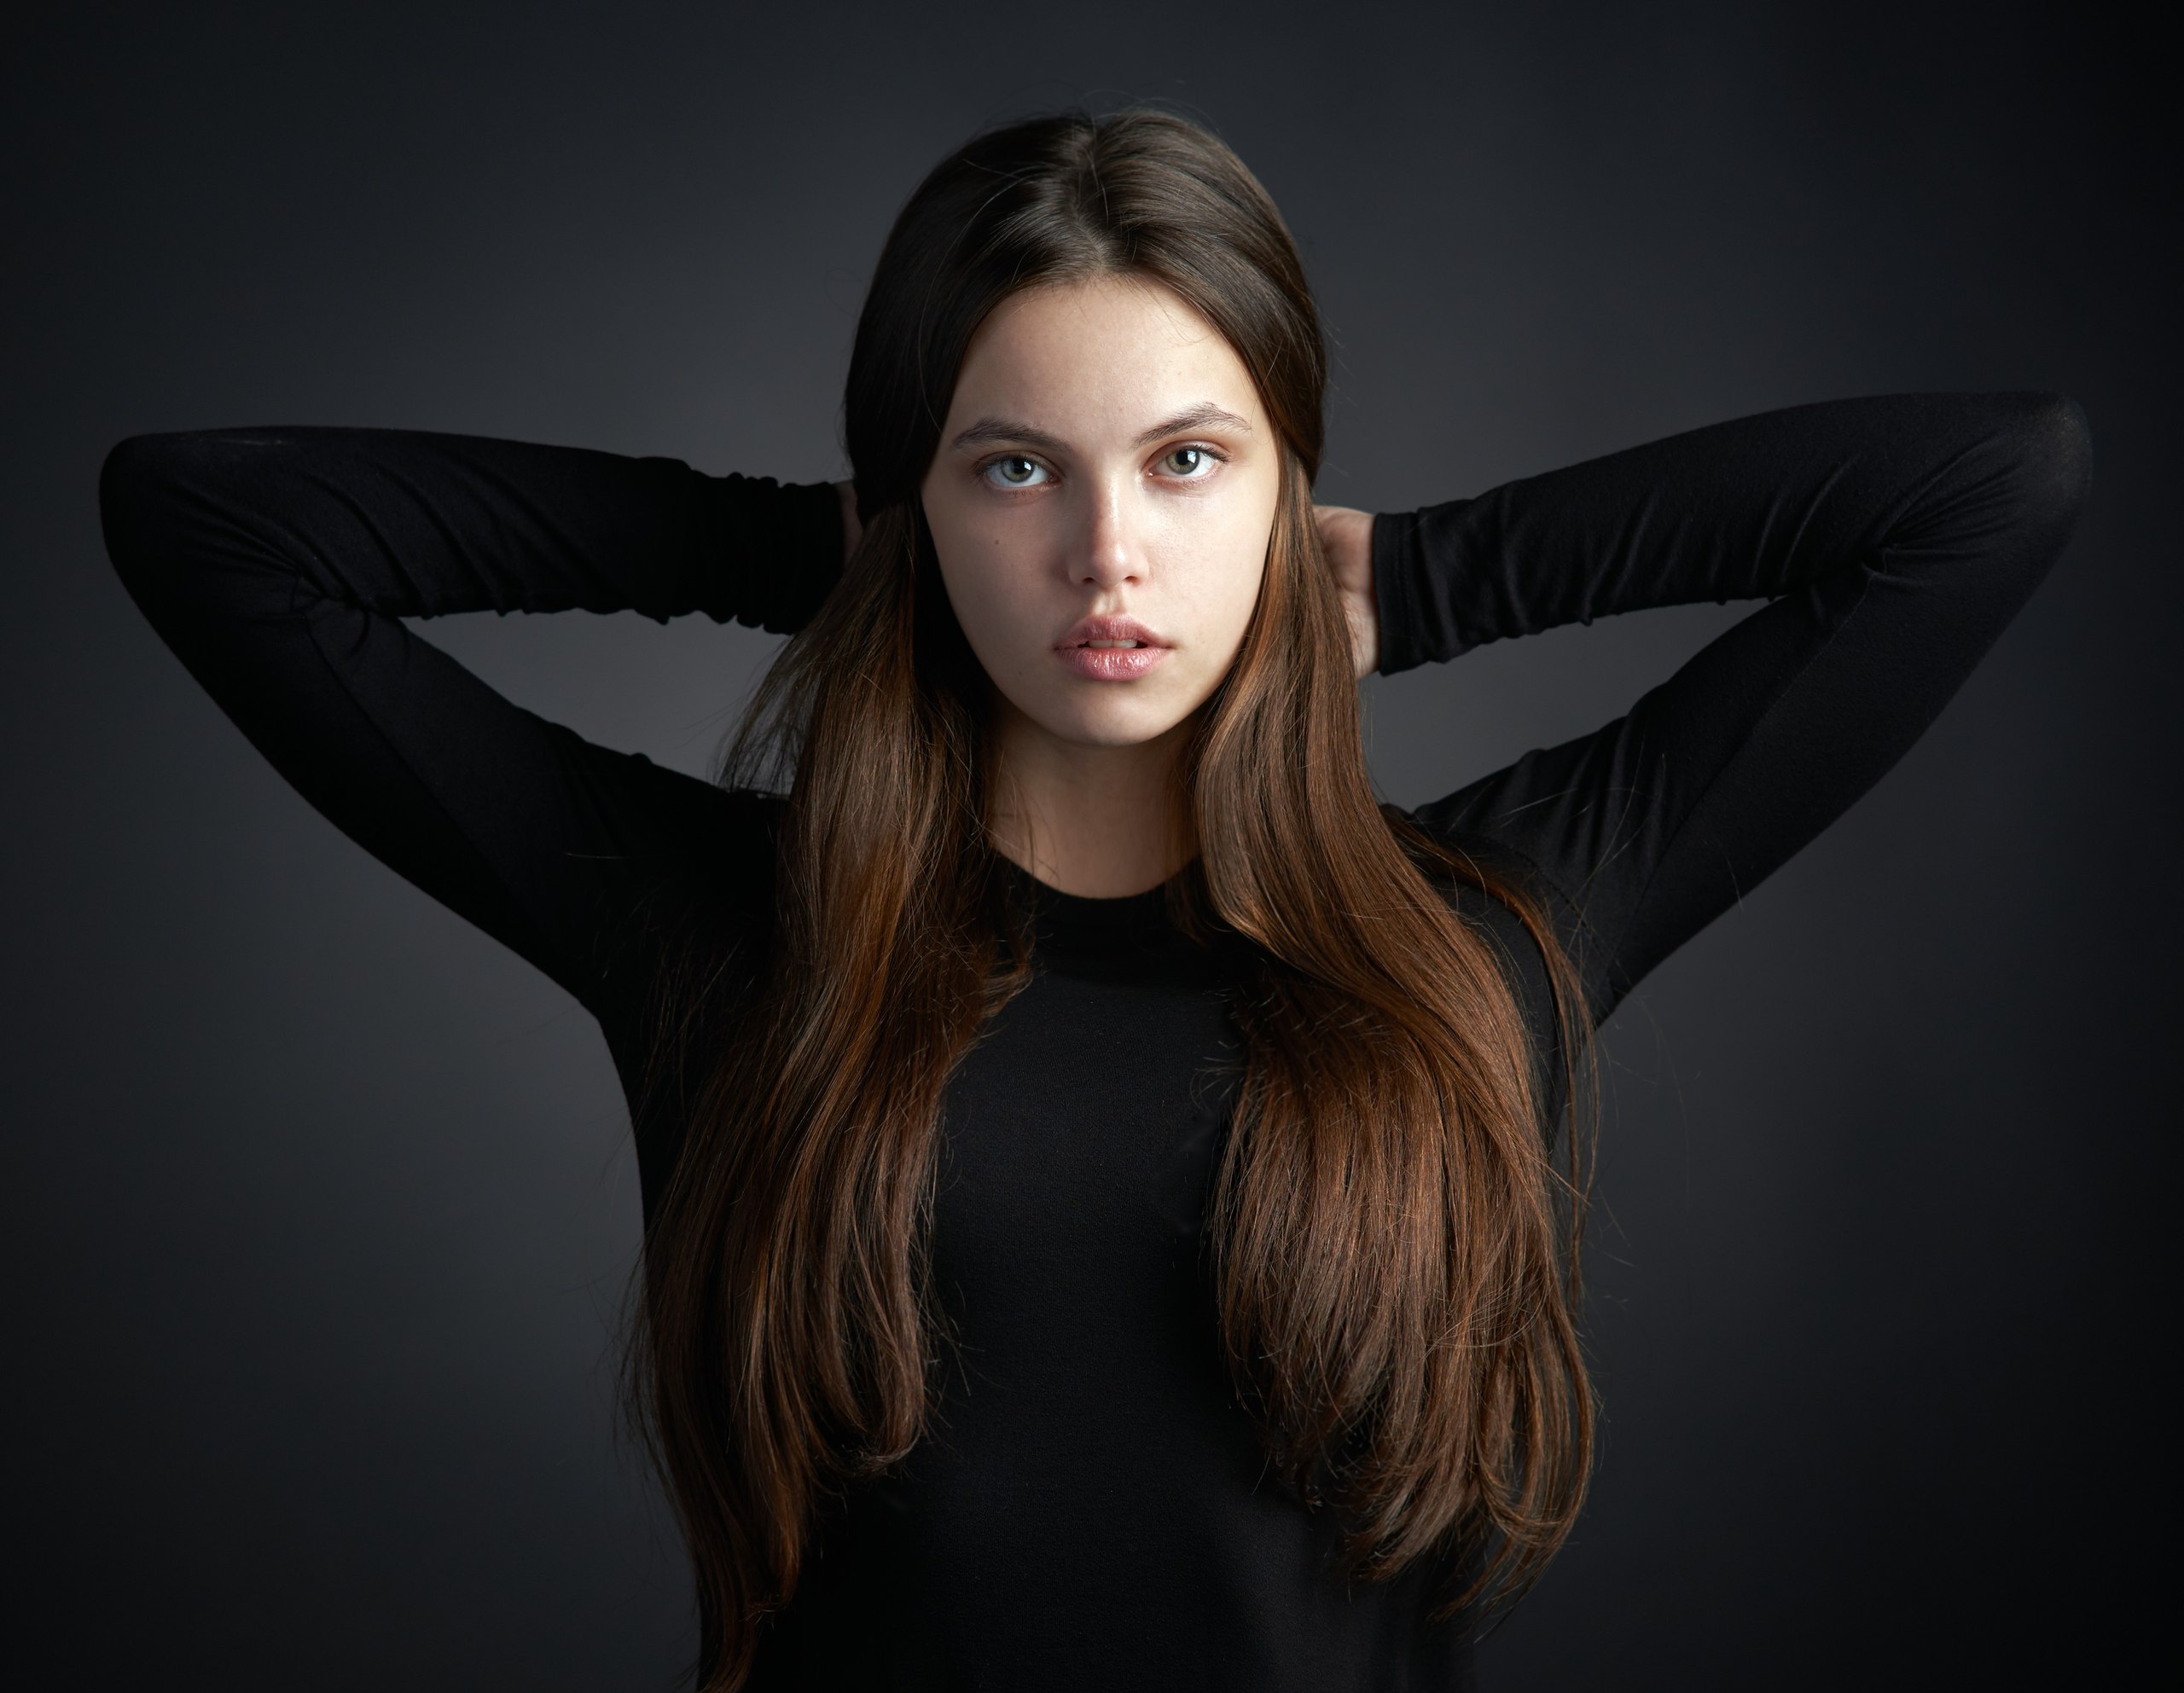 Brown-haired in black · free photo